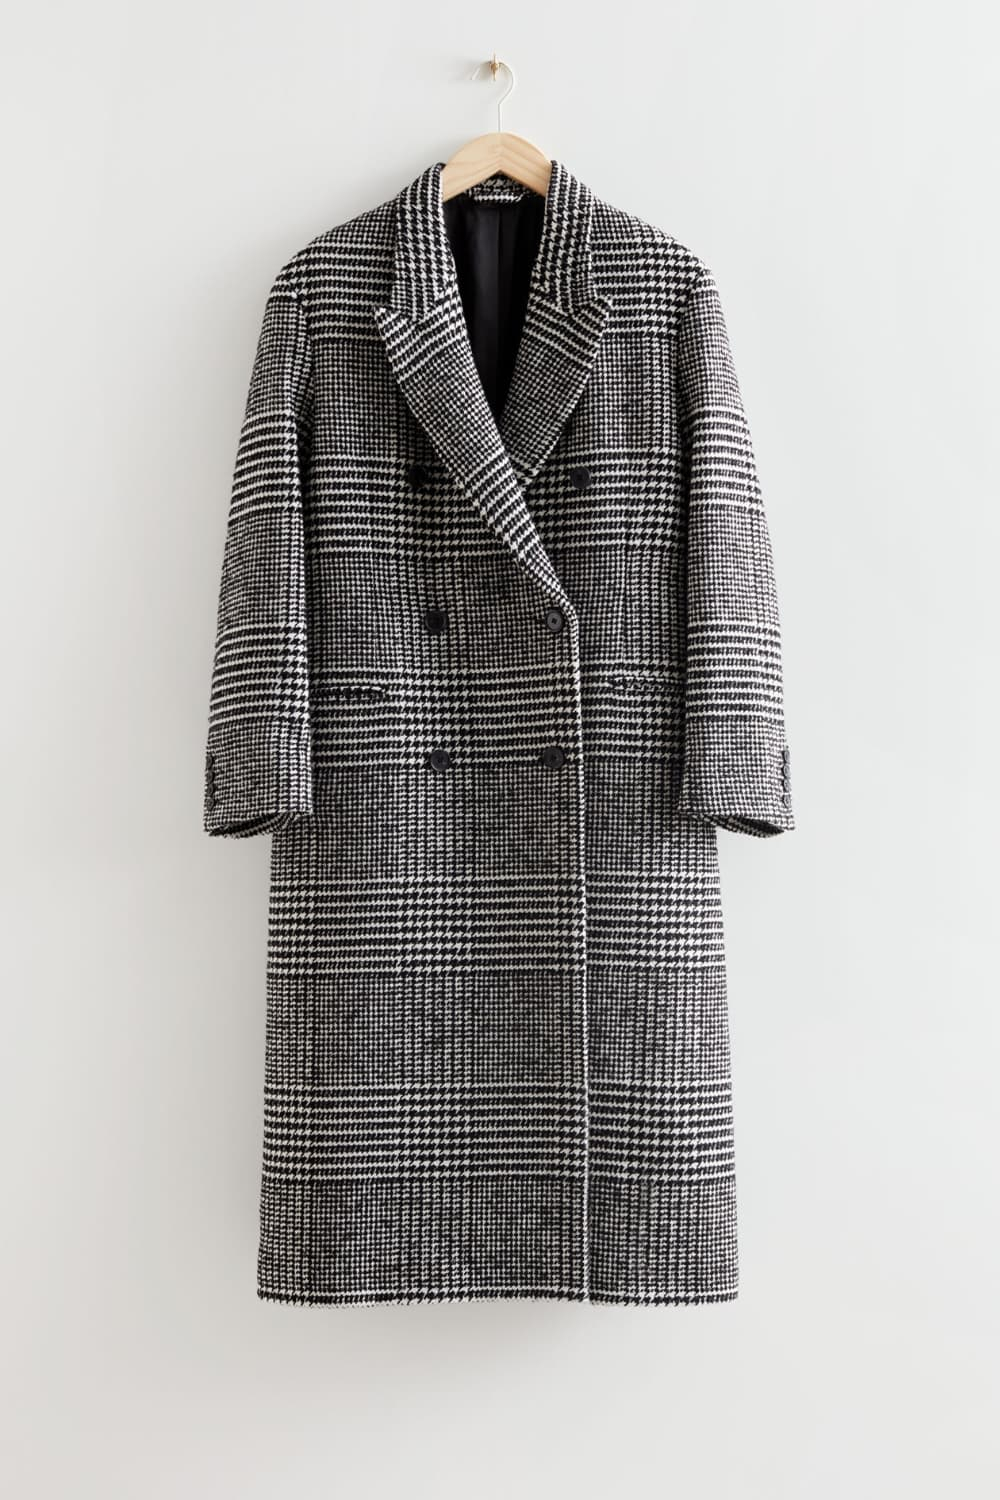 & Other Stories Plaid Coat